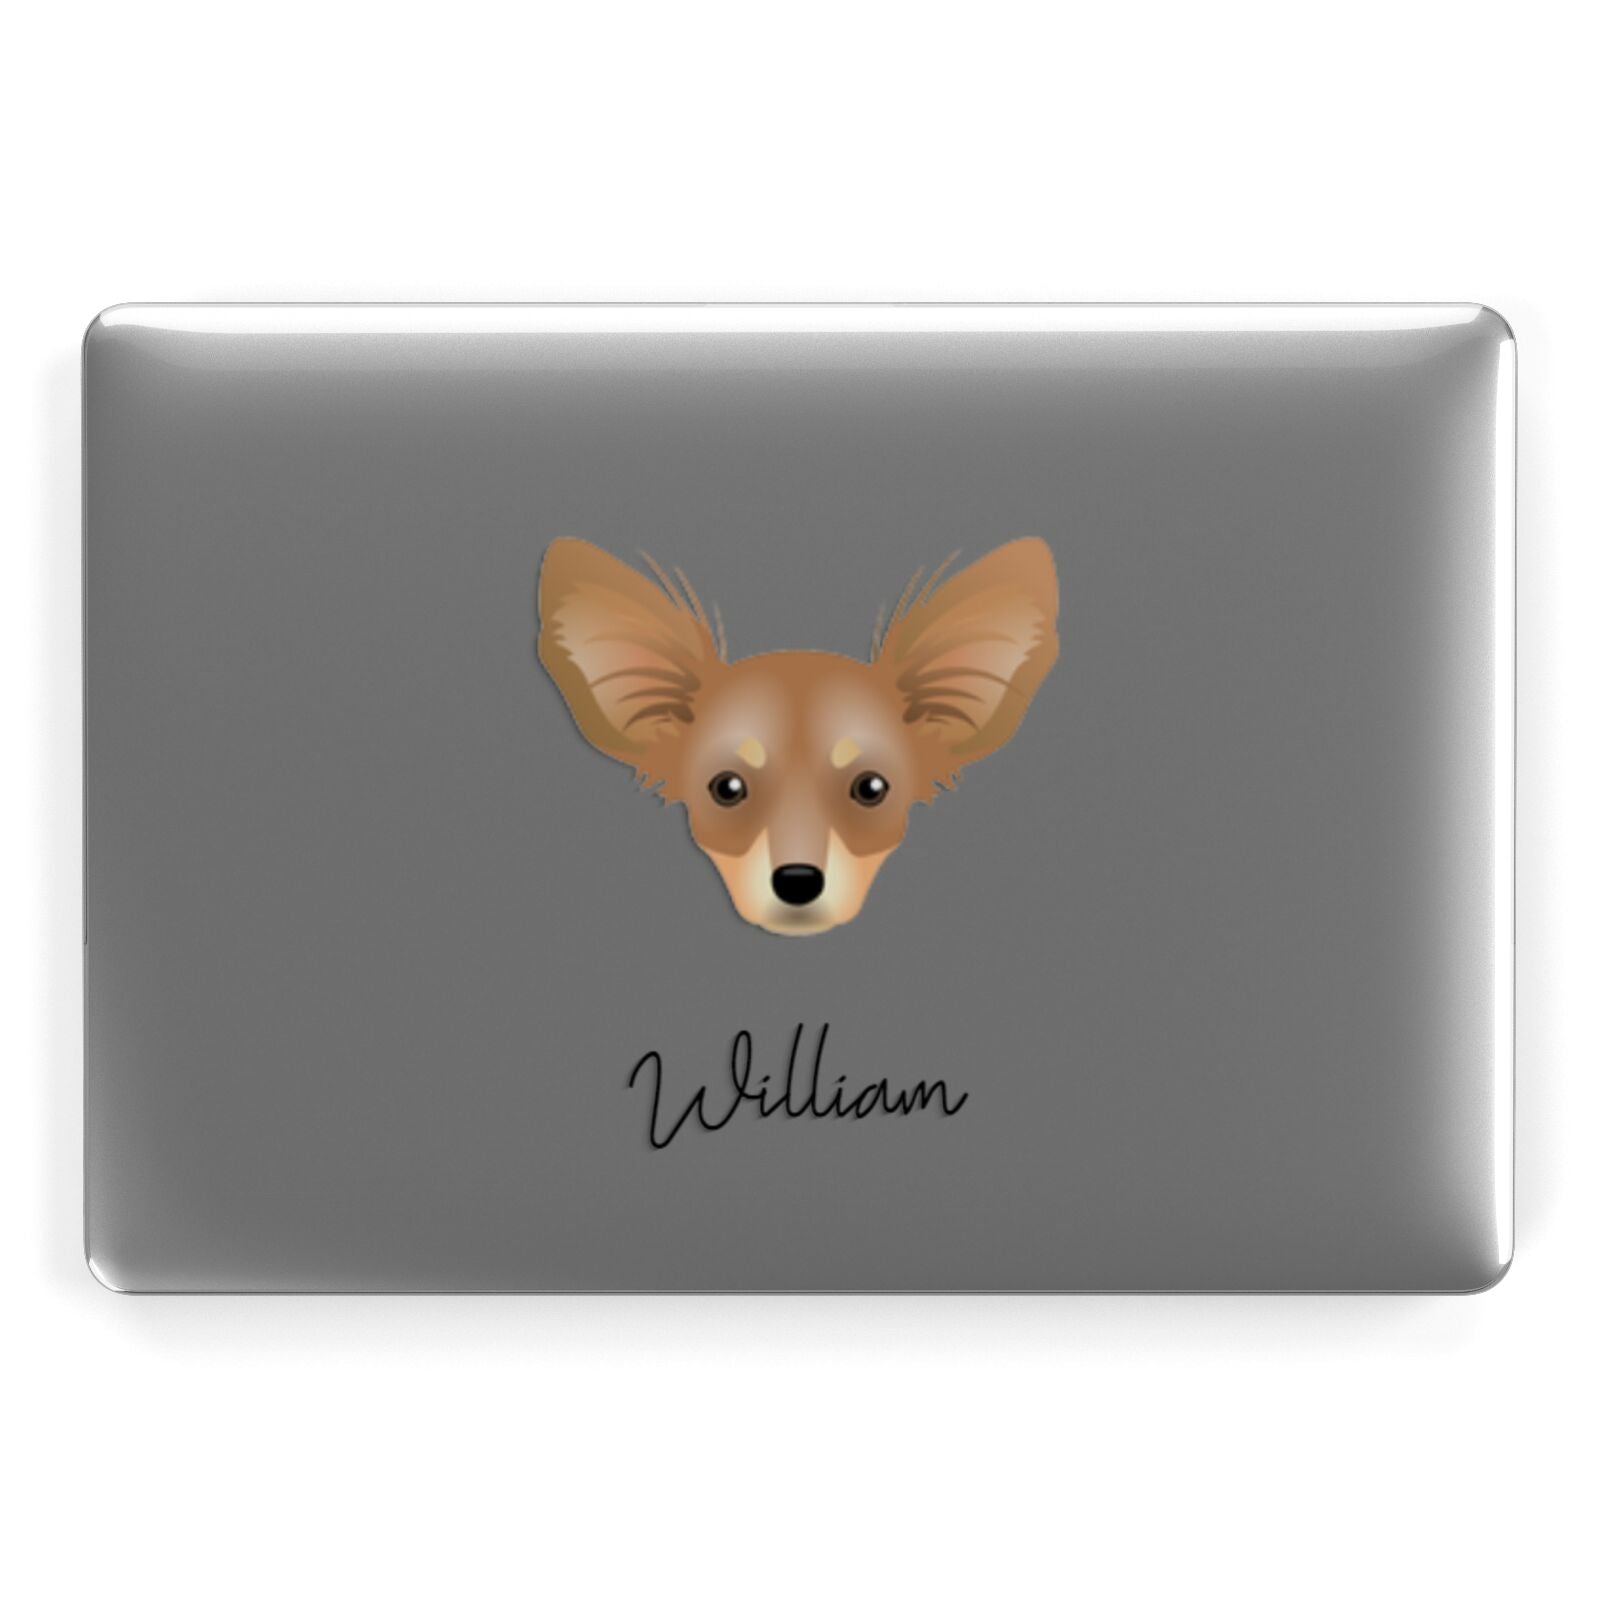 Russian Toy Personalised Apple MacBook Case